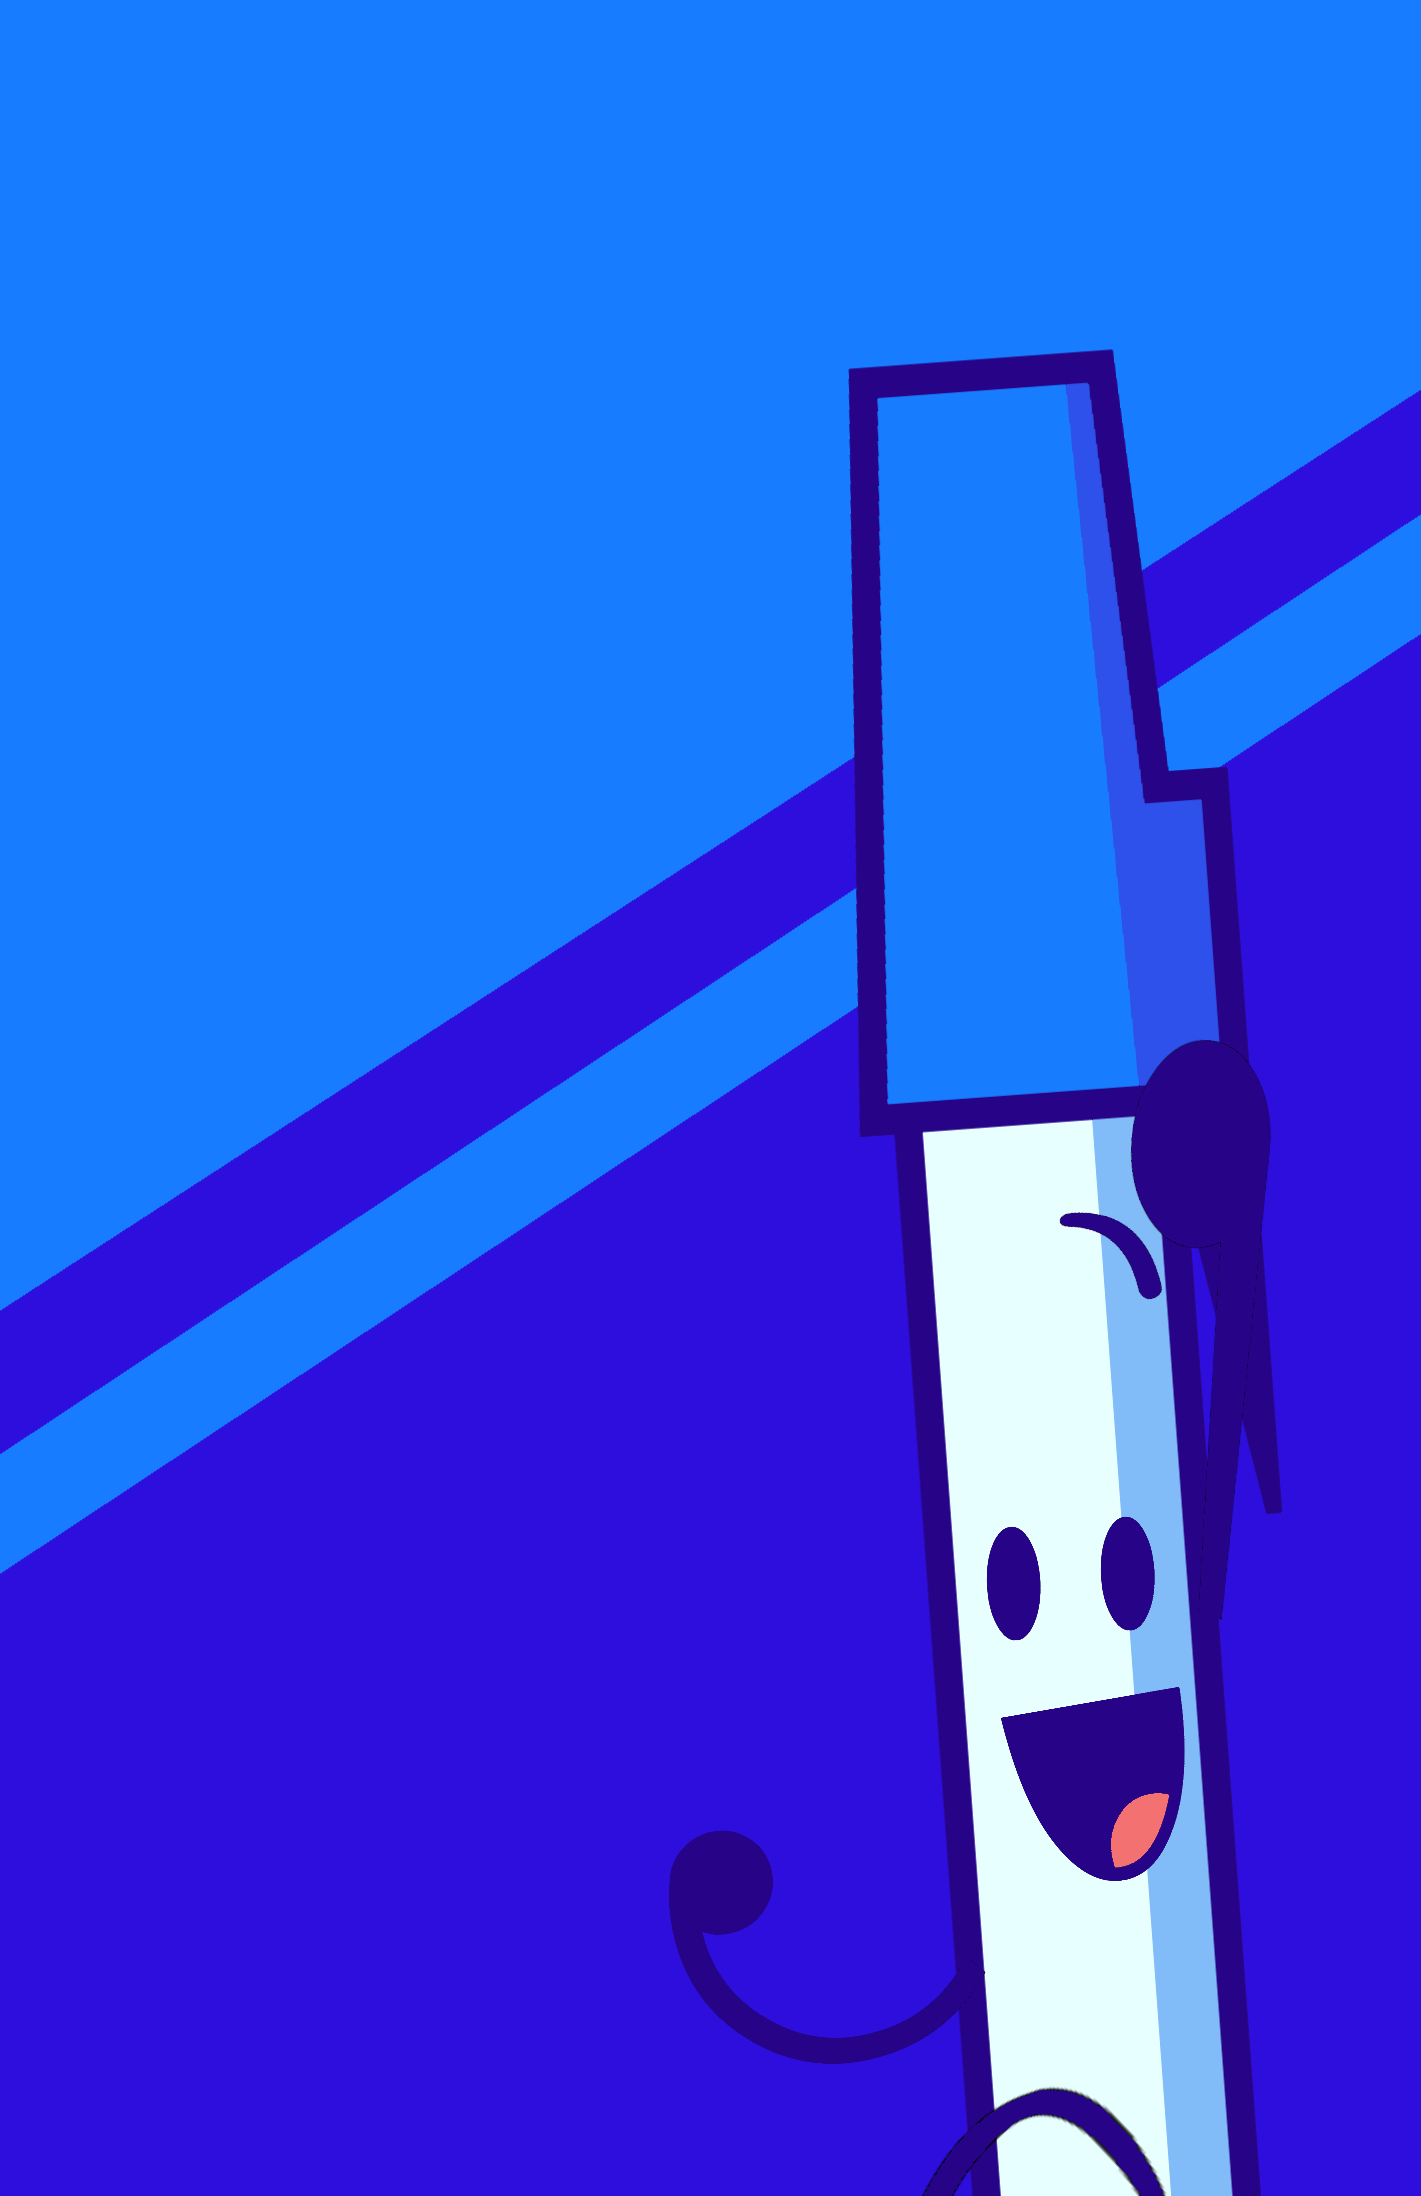 User blog:SnowballSB/New Battle for BFB/TPOT Voting Icons with BFDI